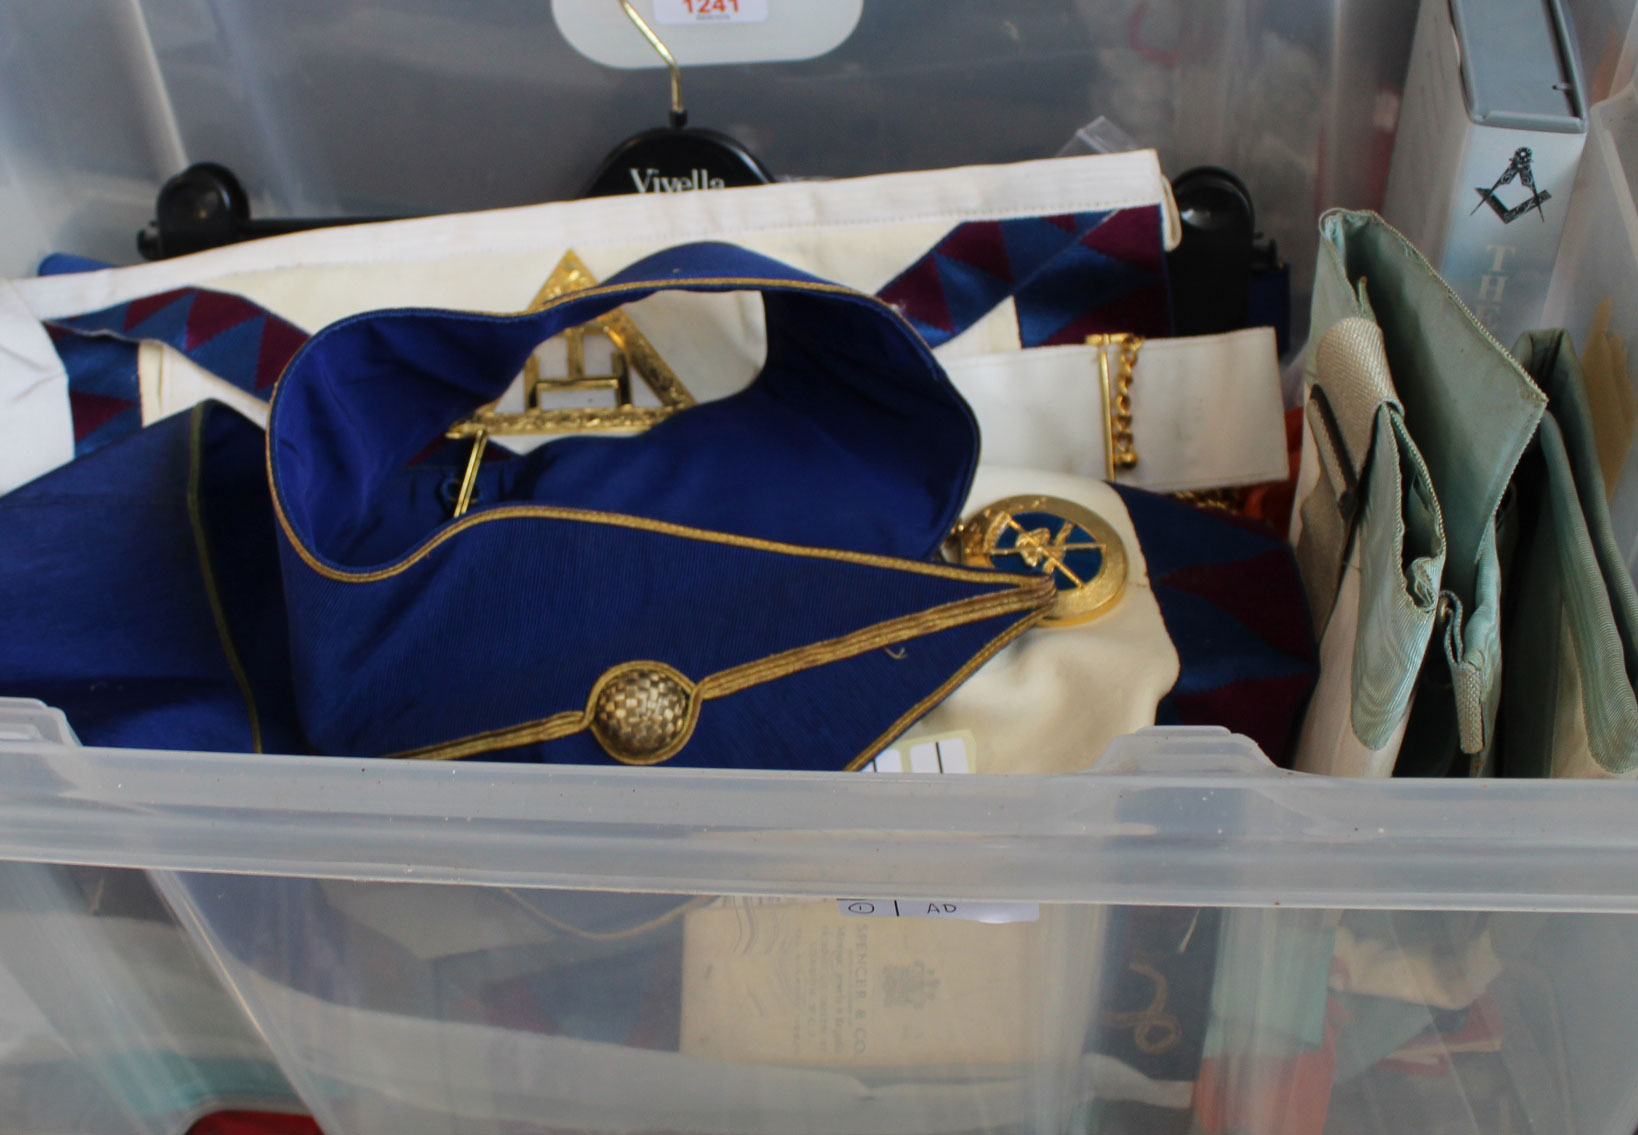 Quantity of Masonic ephemera related items including aprons with attached regalia, various items